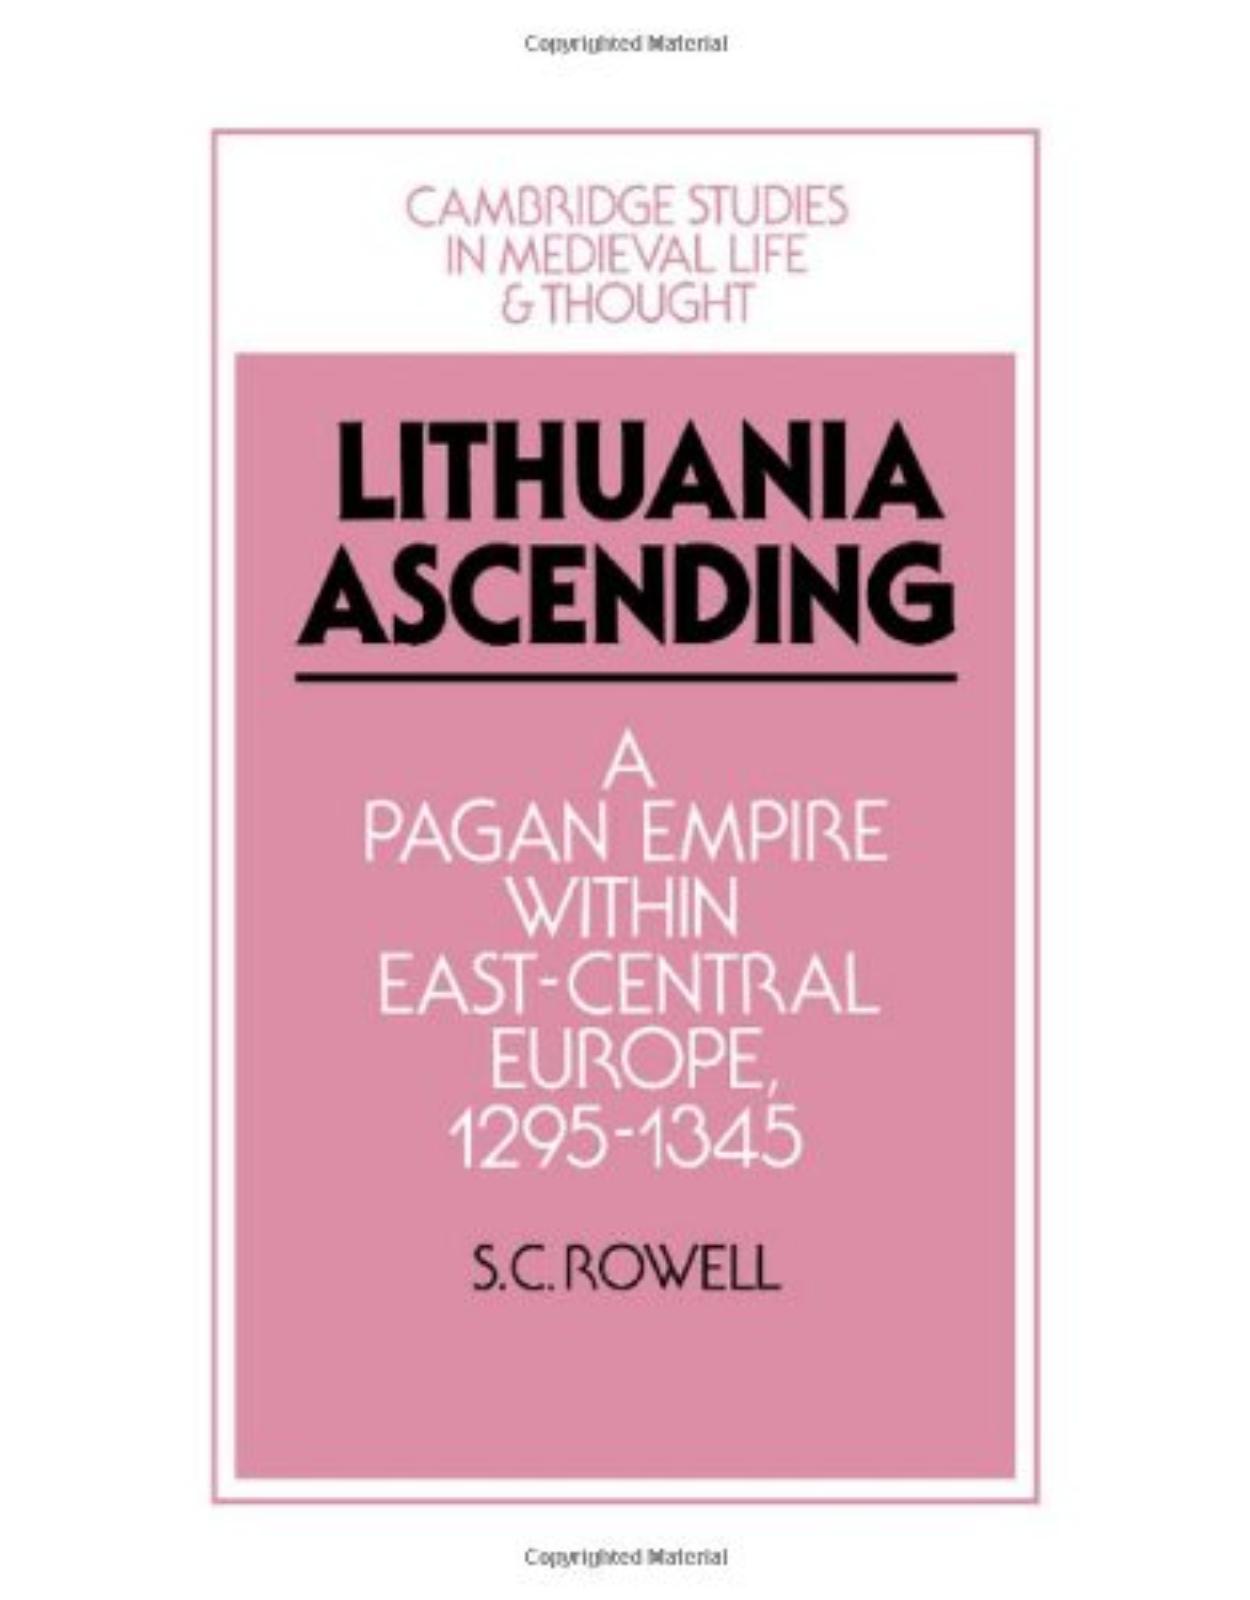 Lithuania Ascending: A Pagan Empire within East-Central Europe, 1295-1345 (Cambridge Studies in Medieval Life and Thought: Fourth Series) 